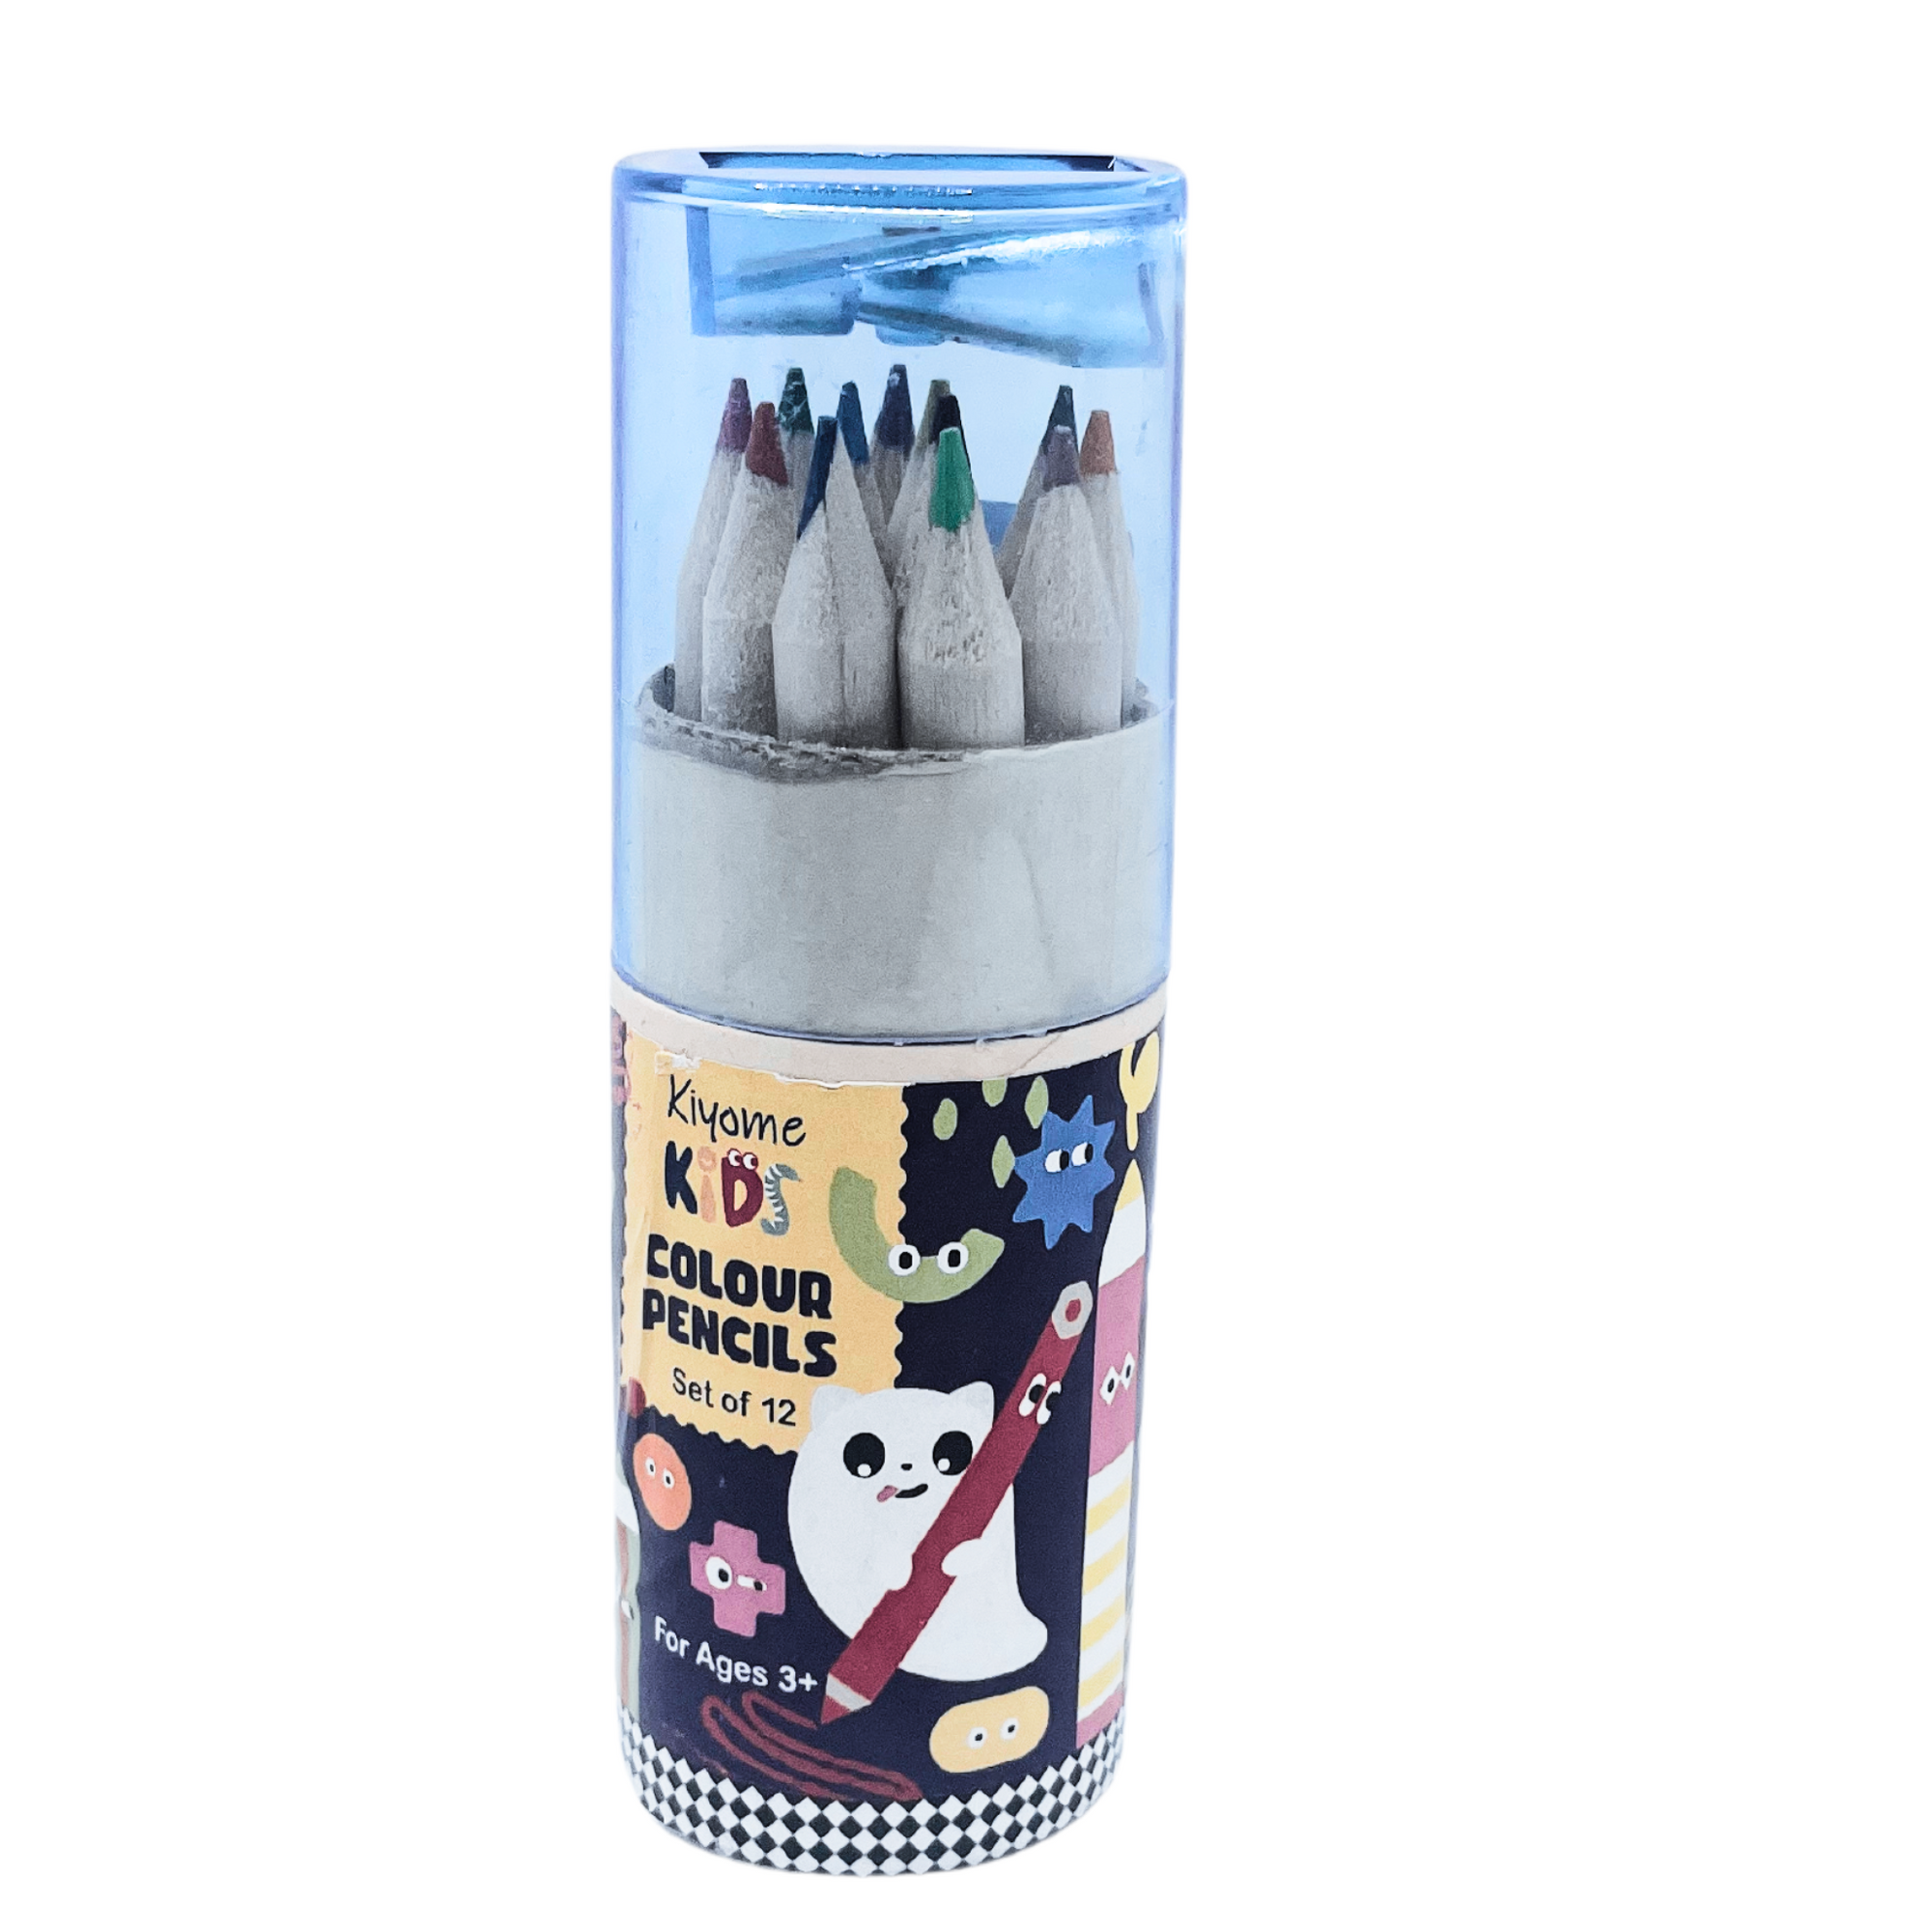 Kiyome Kids Colored Pencil Set - 12 colors with sharpner